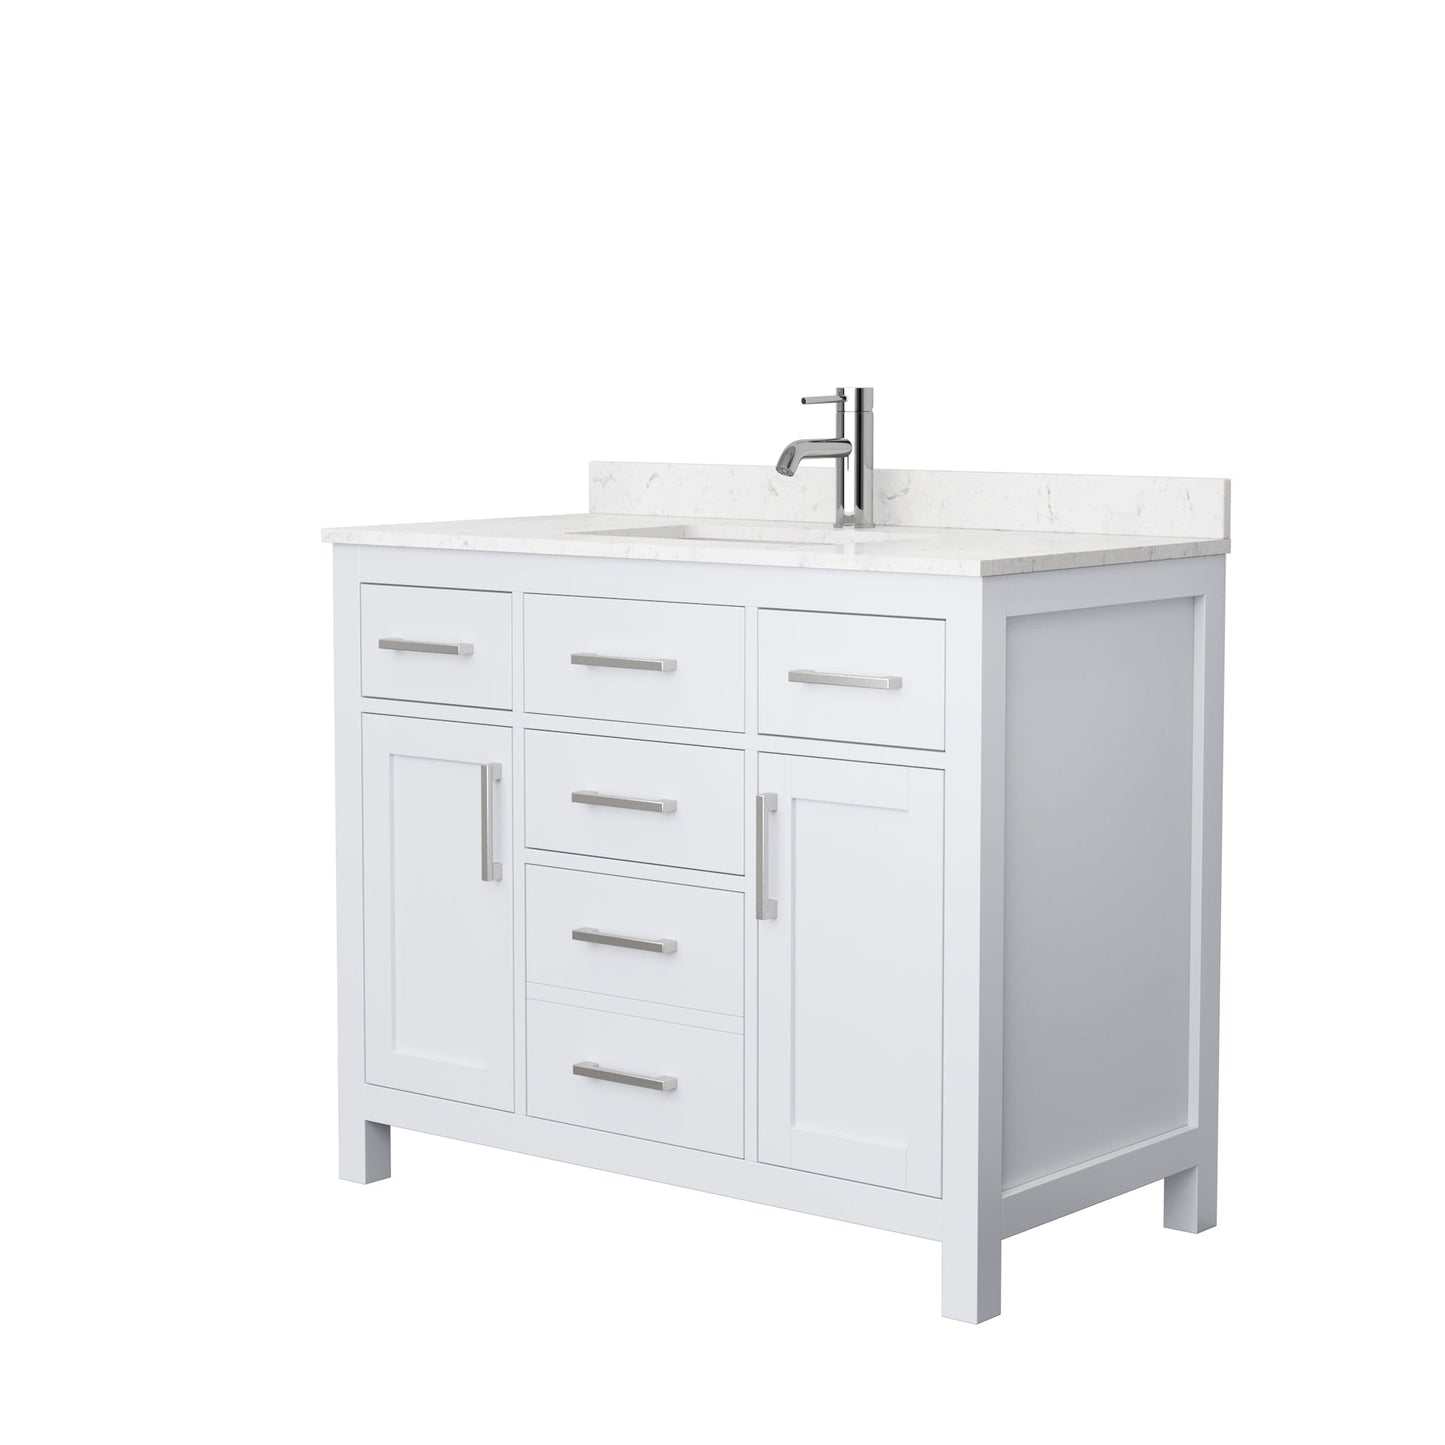 Wyndham Collection Beckett 42" Single Bathroom White Vanity With White Carrara Cultured Marble Countertop, Undermount Square Sink And Brushed Nickel Trim